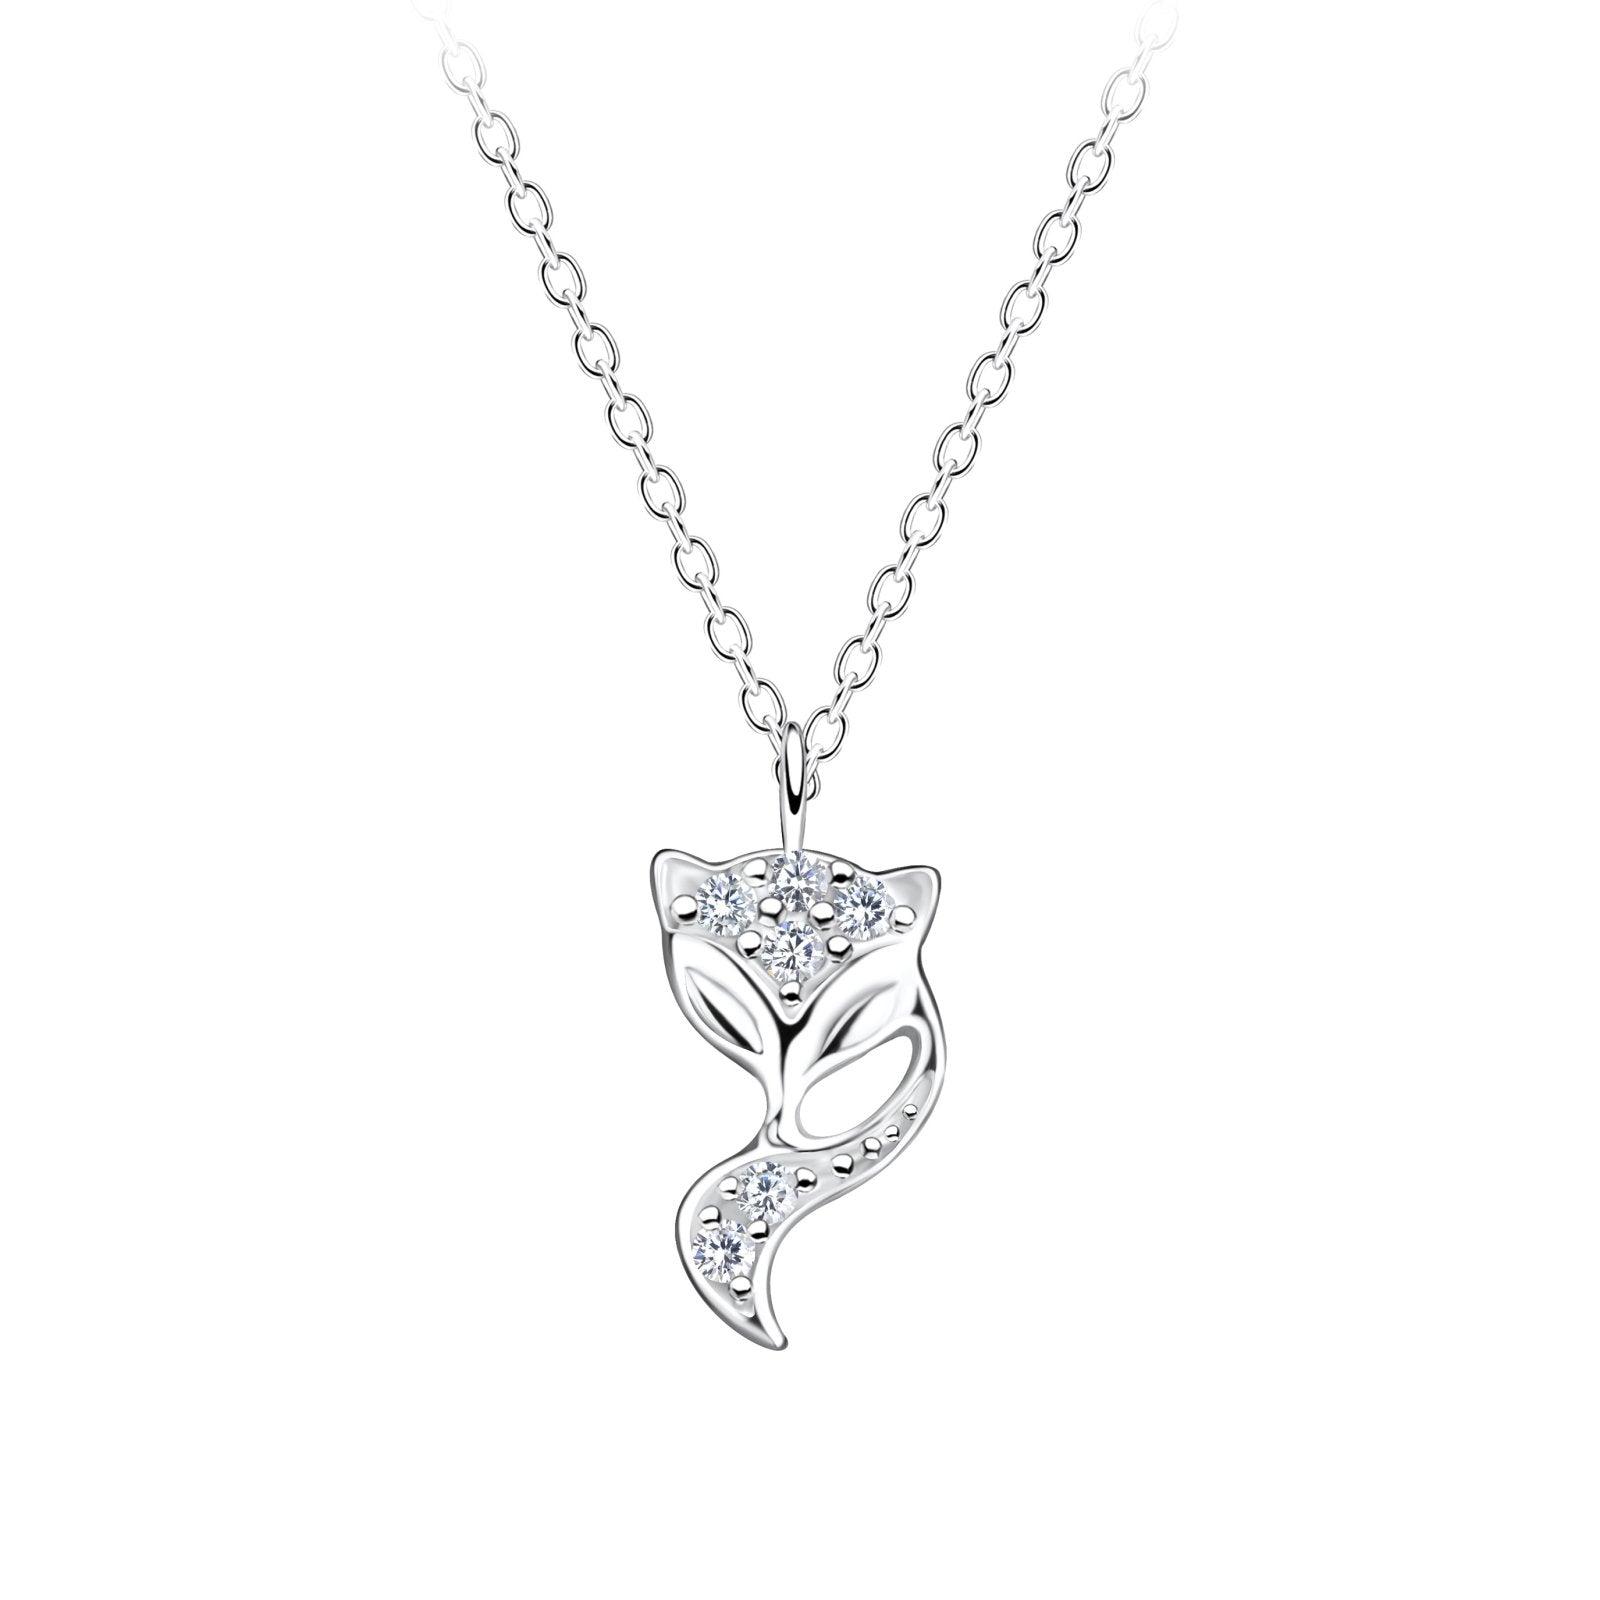 Silver Fox Necklace setting with Cubic Zirconia